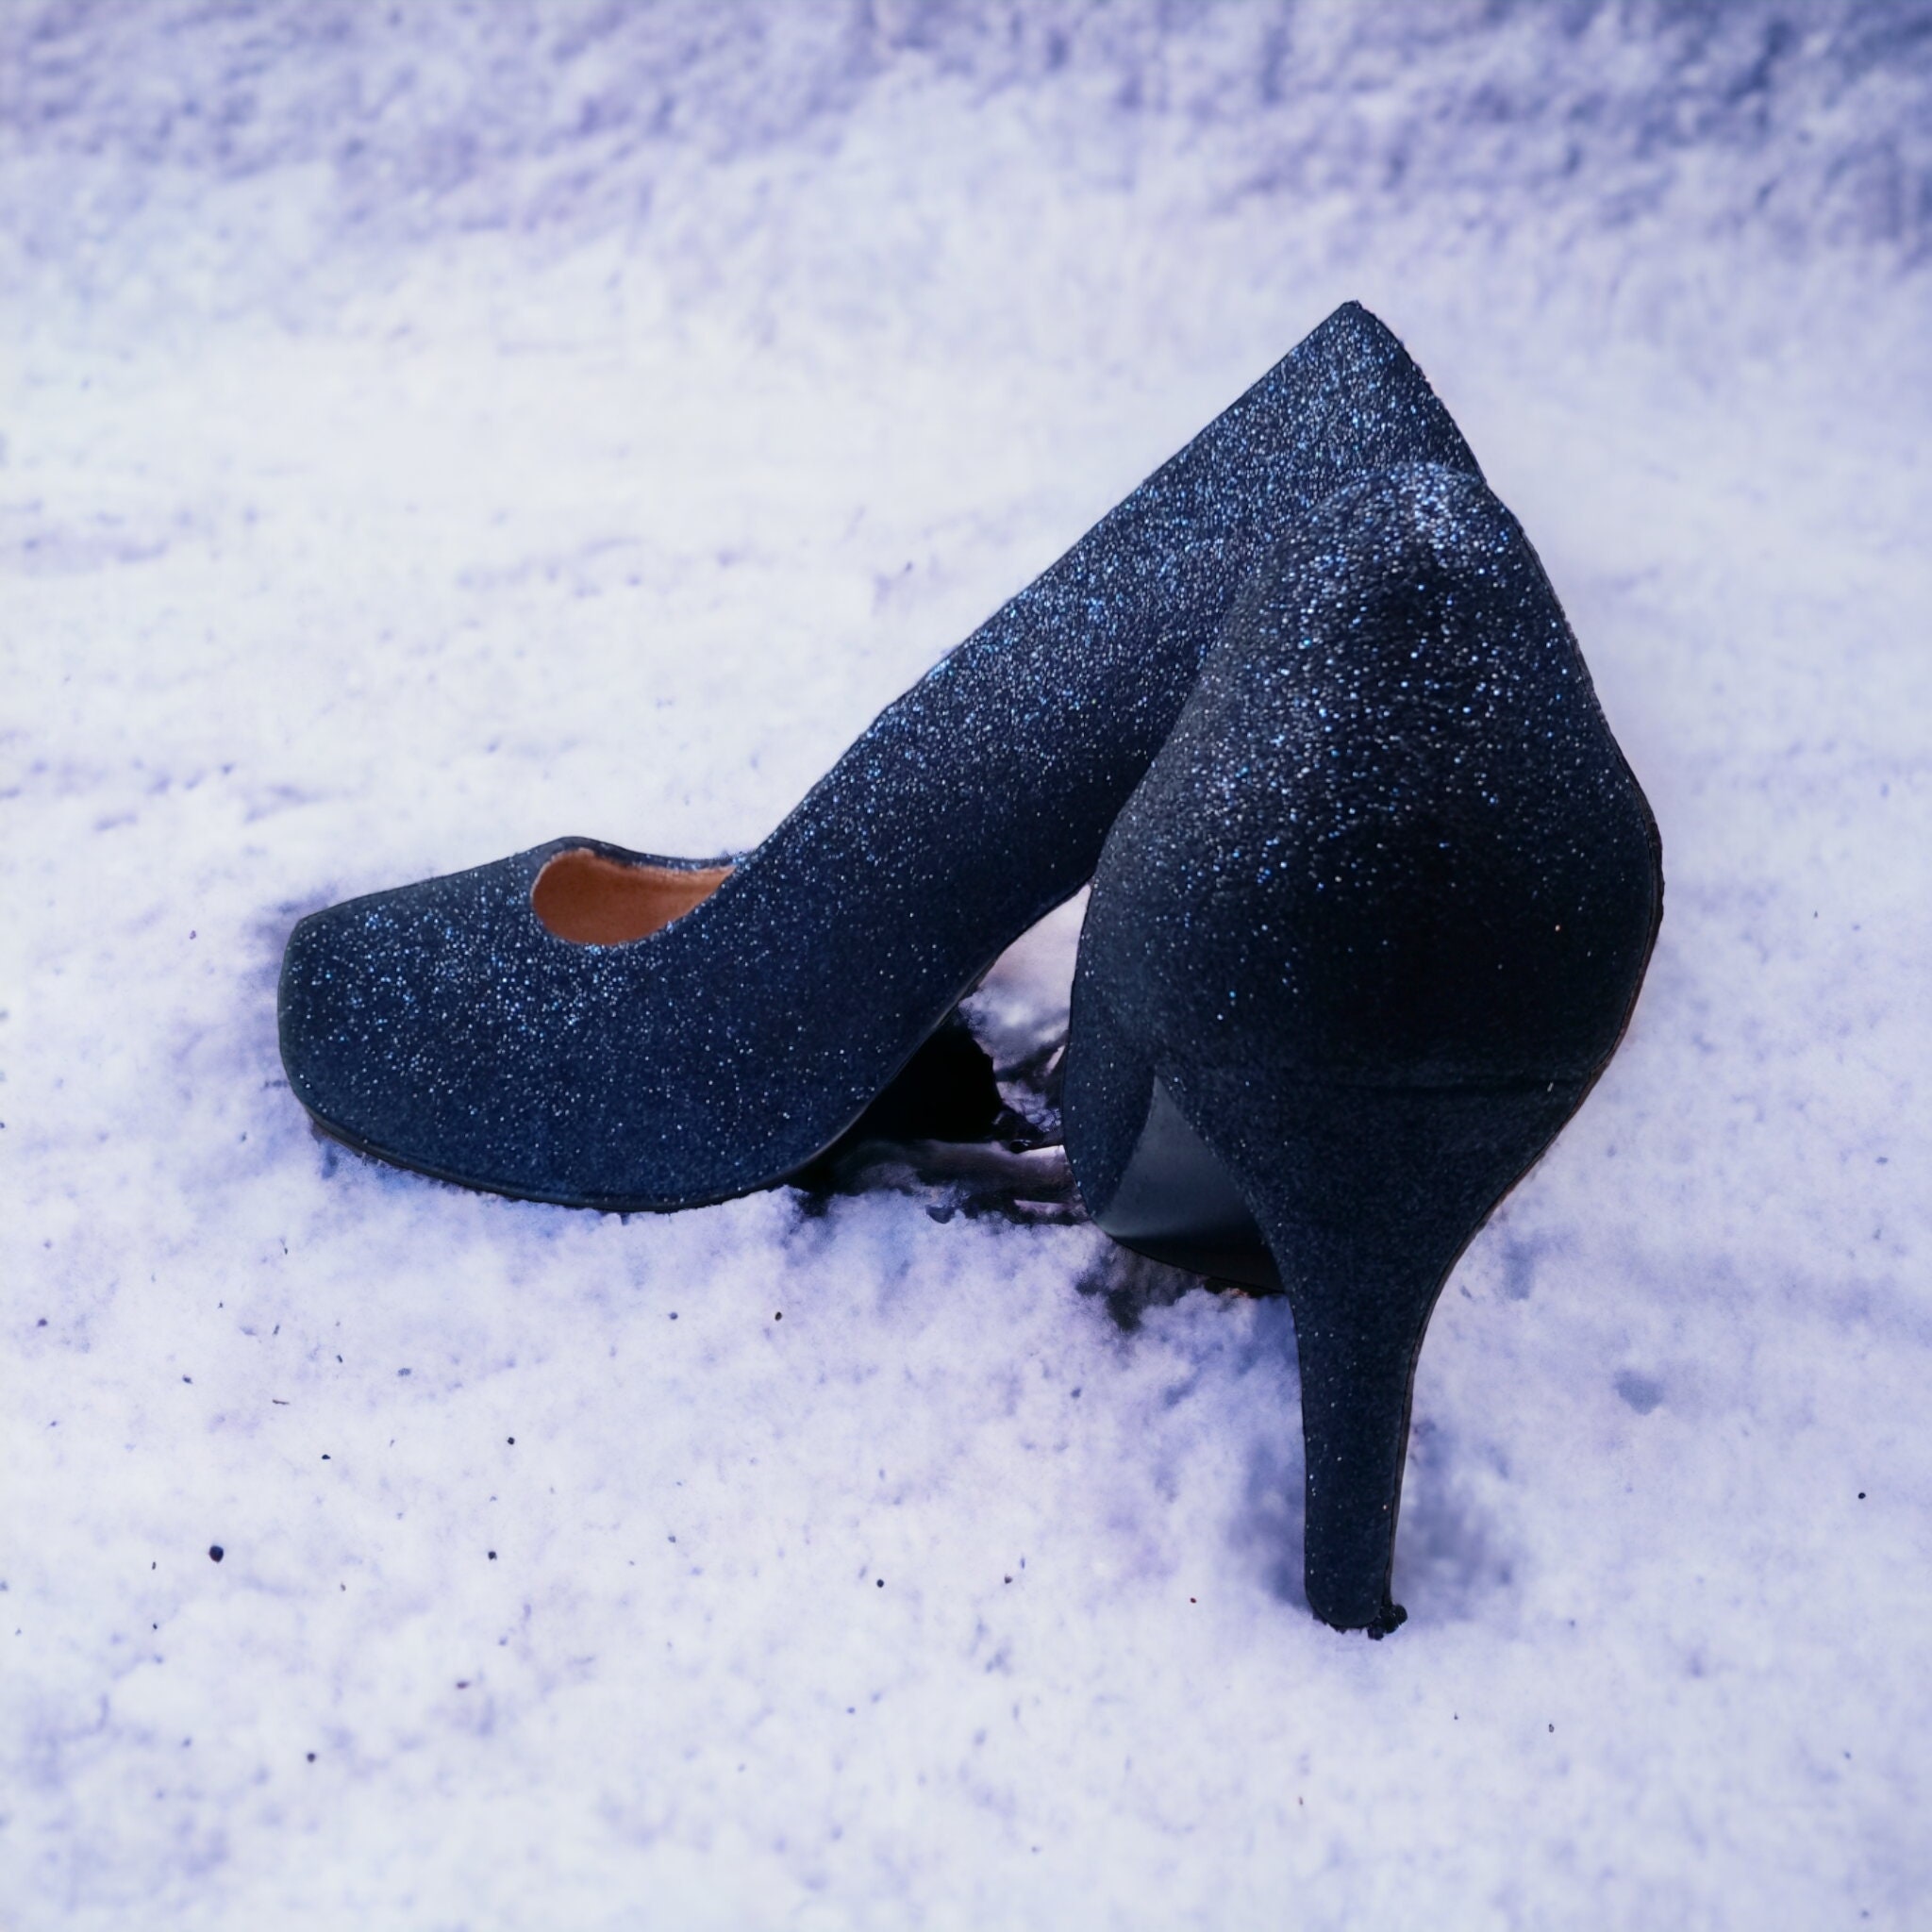 High Heel Shoe Of Blue Glitter Sparkle On White Background Stock Photo -  Download Image Now - iStock